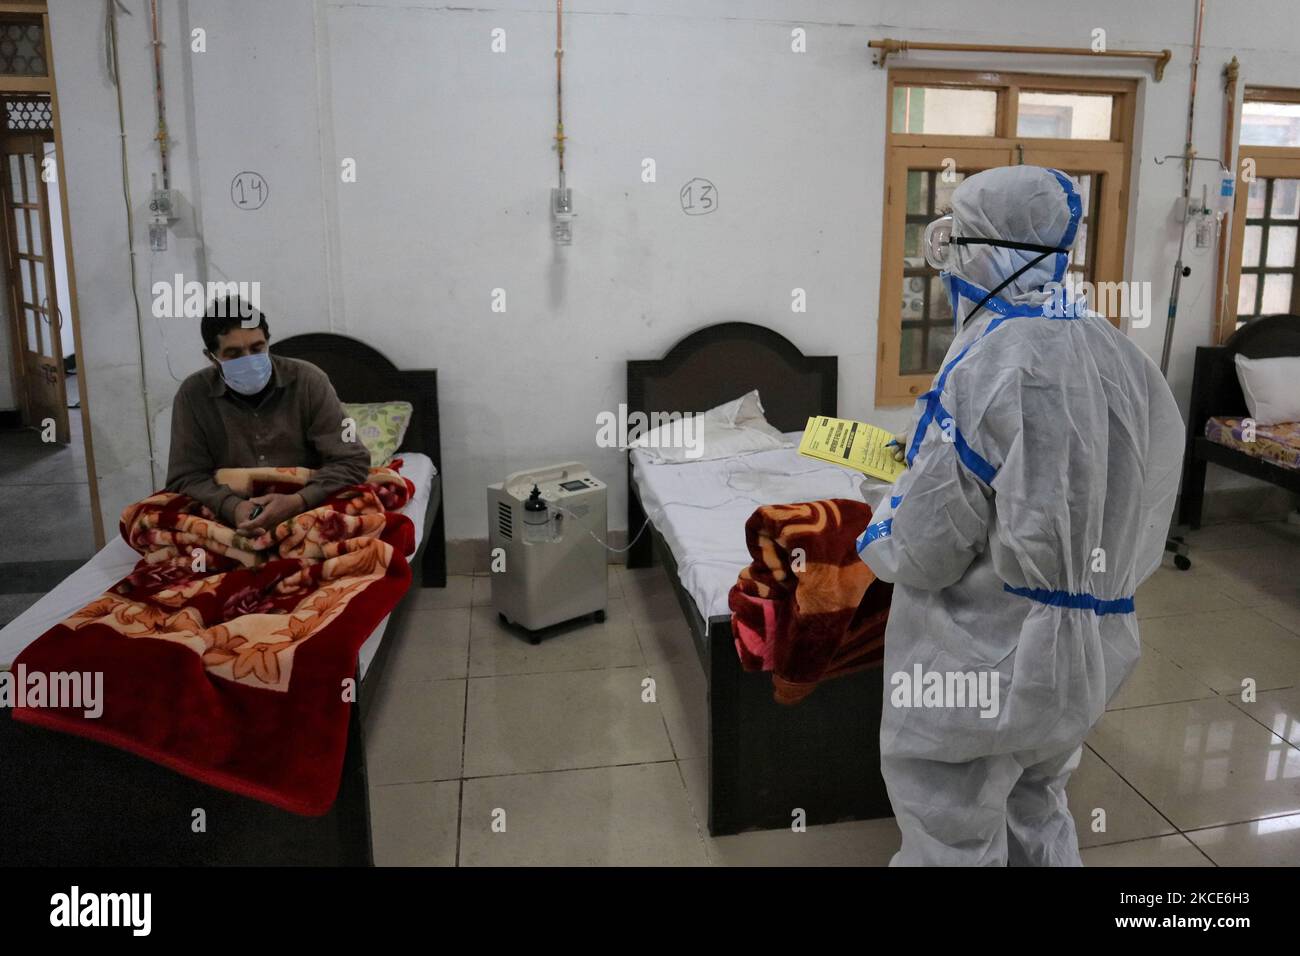 A Health worker examins a Covid-19 patient at a temporary Covid-19 hospital in Srinagar, Indian Administered Kashmir on 08 May 2021. A Local NGO Athrout has converted Hajj house into a 100-bedded Covid centre as the space in hospitals (Photo by Muzamil Mattoo/NurPhoto) Stock Photo